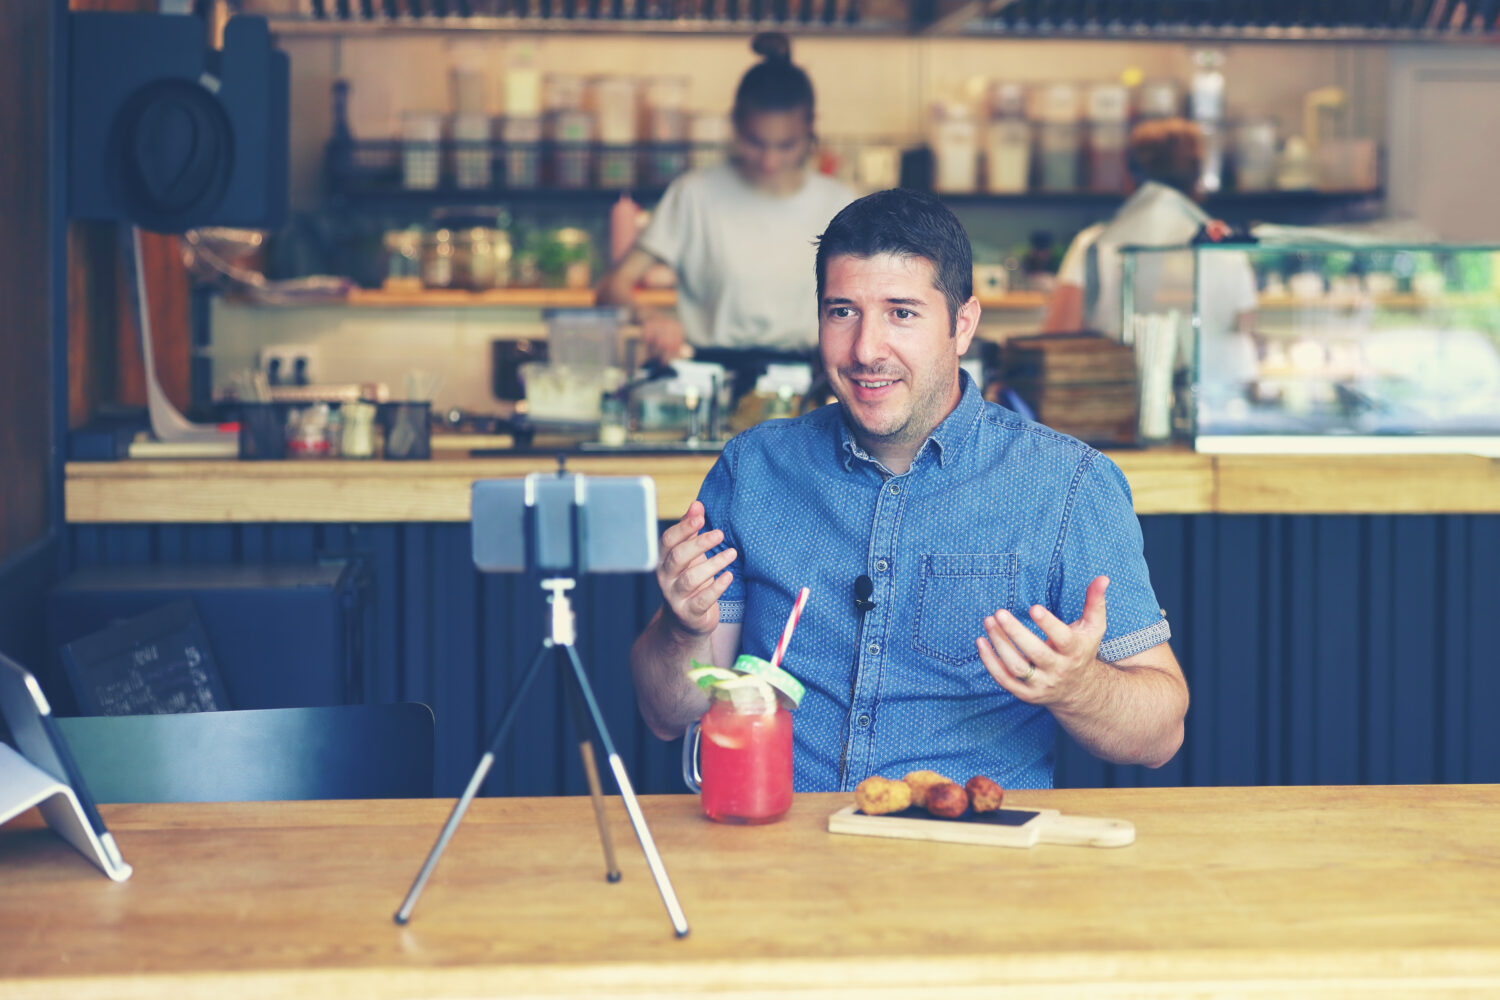 man with blue shirt recording himself using a tripod and camera at a restaurant